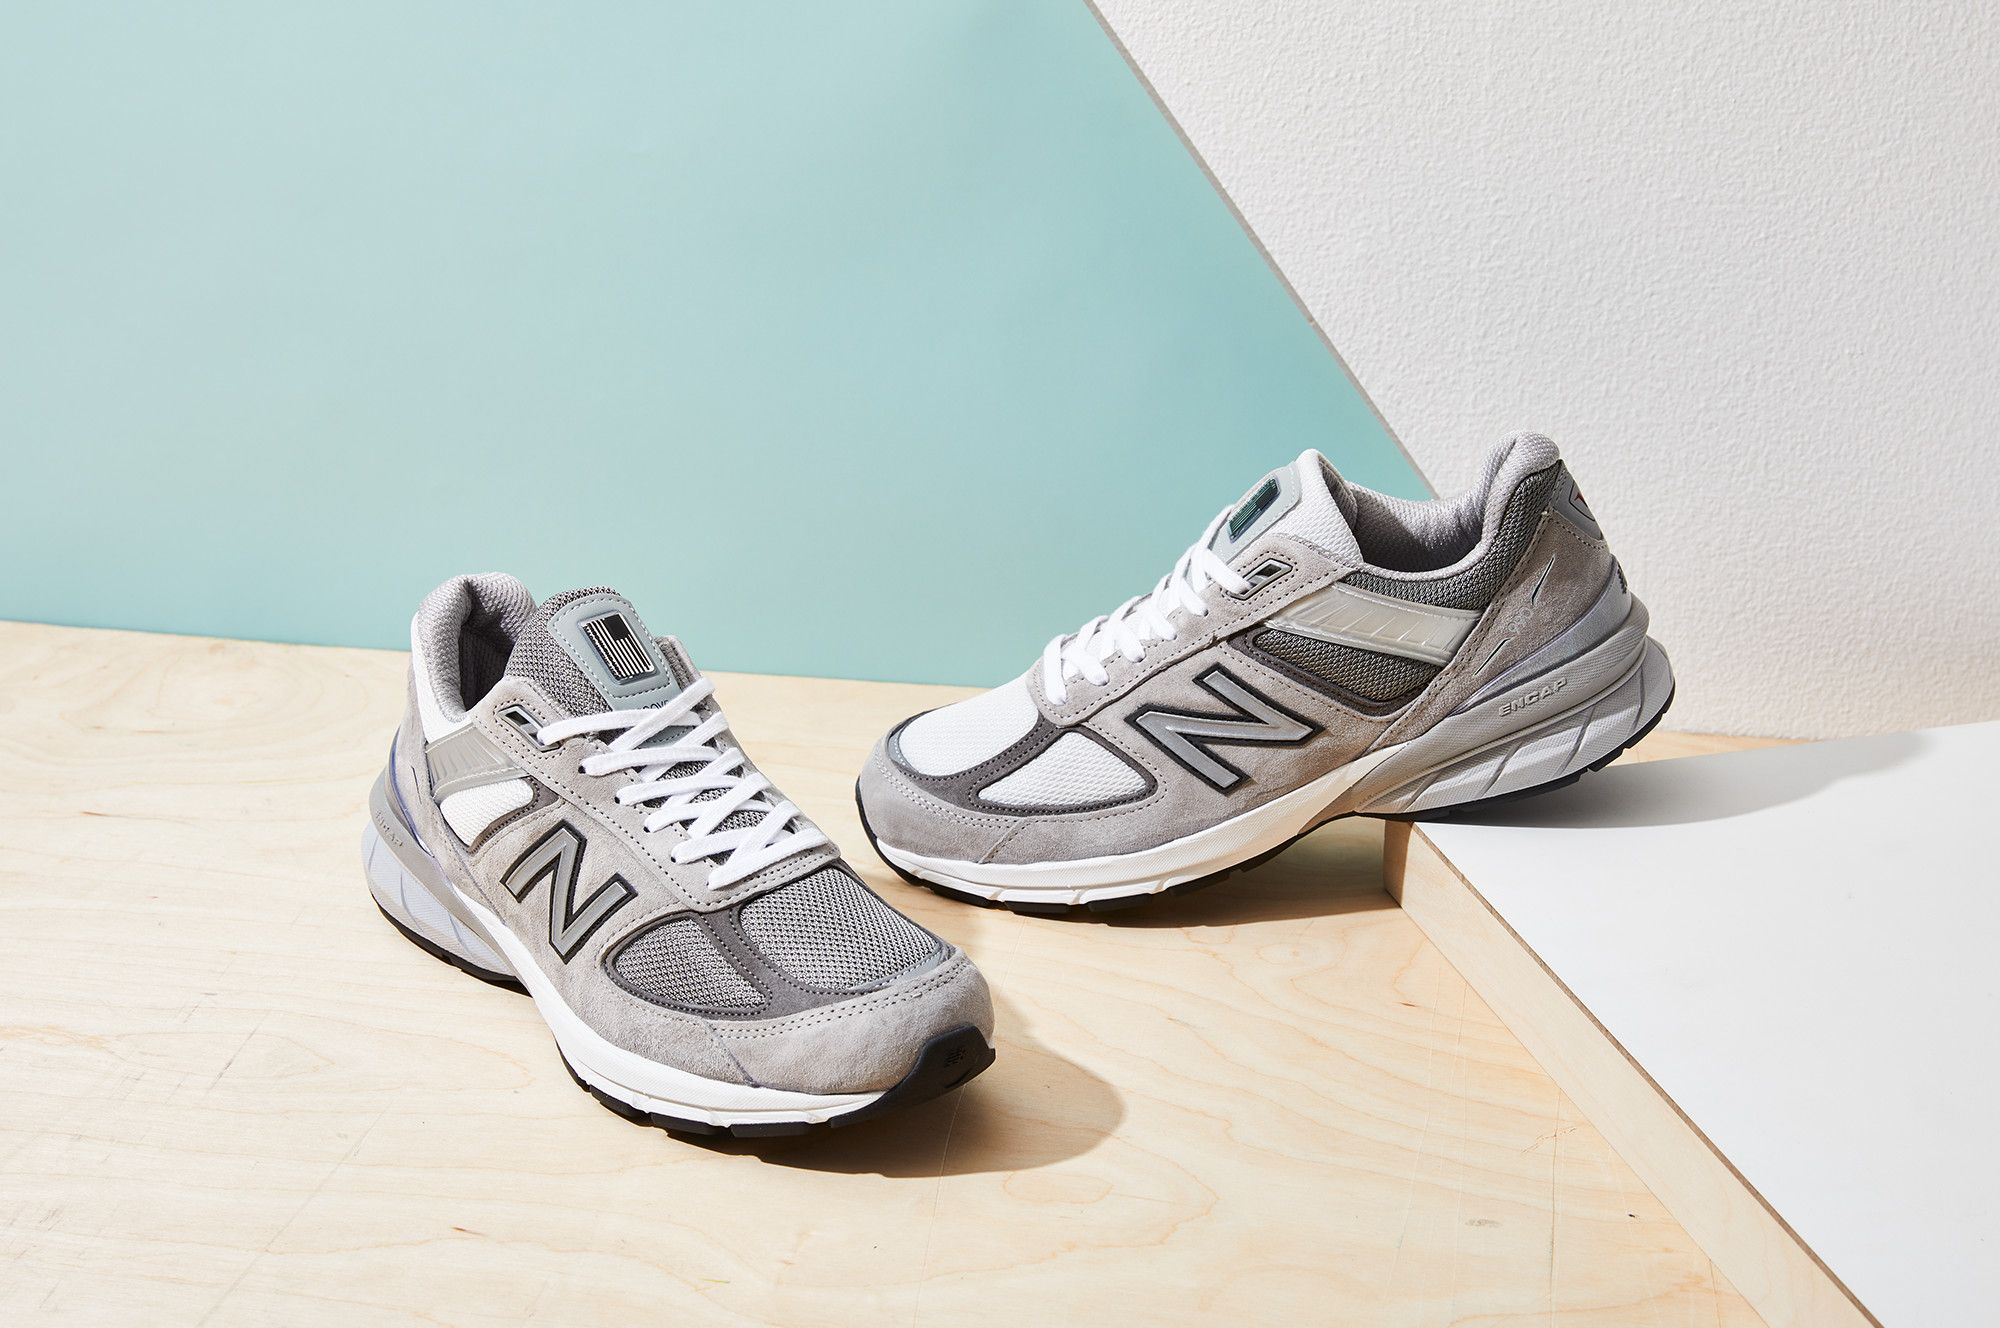 New Balance and Japanese Brand Beams Teamed Up on the Ultimate Dad 